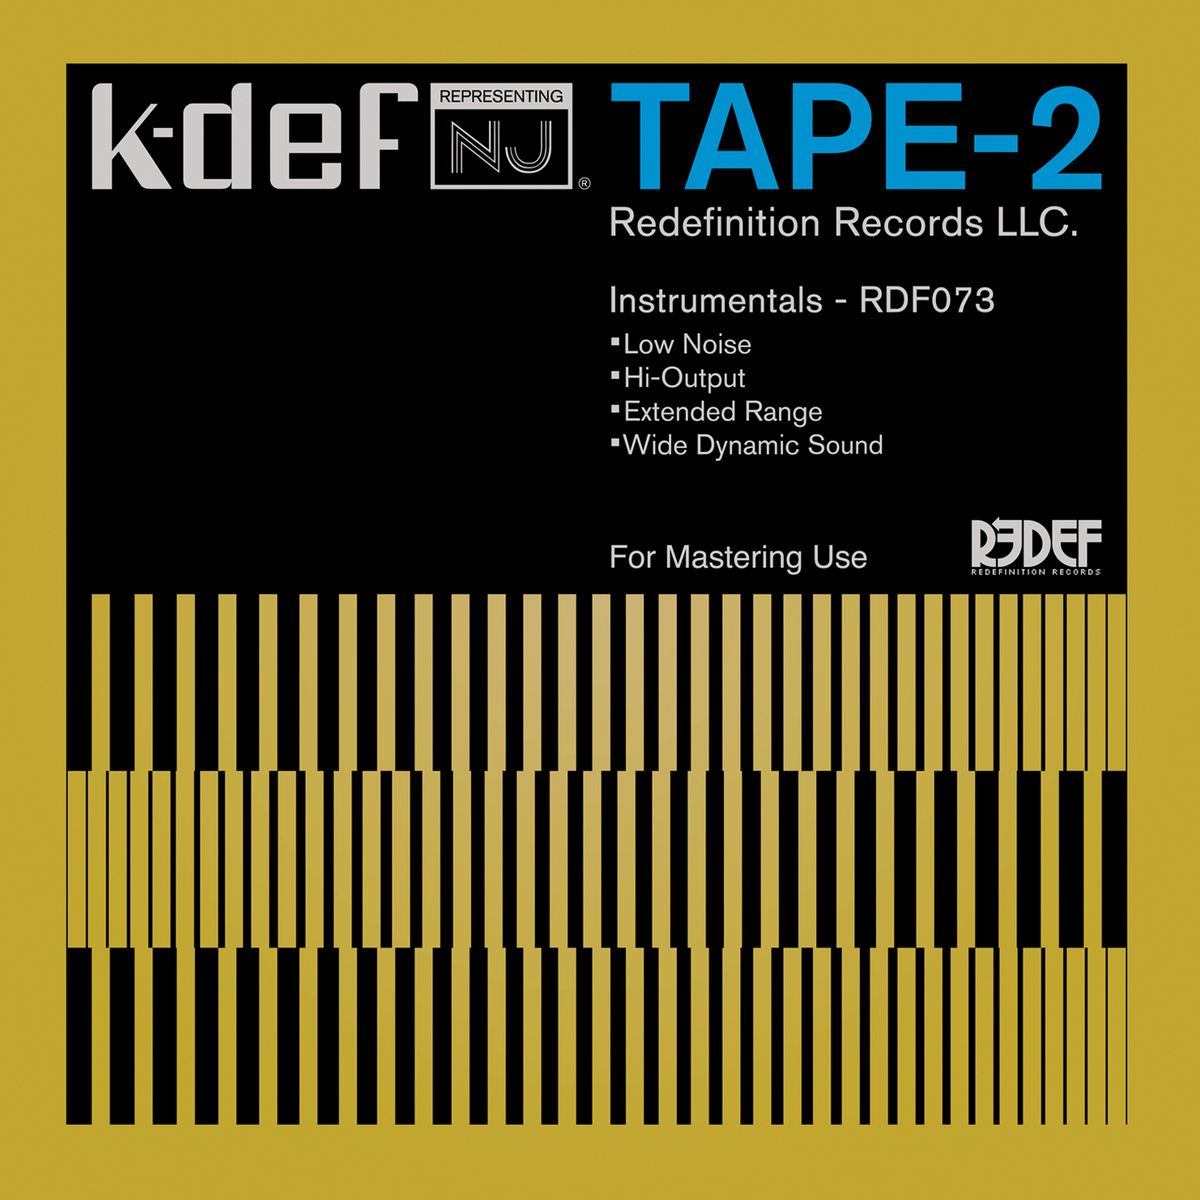 K-Def - Tape Two (Release)